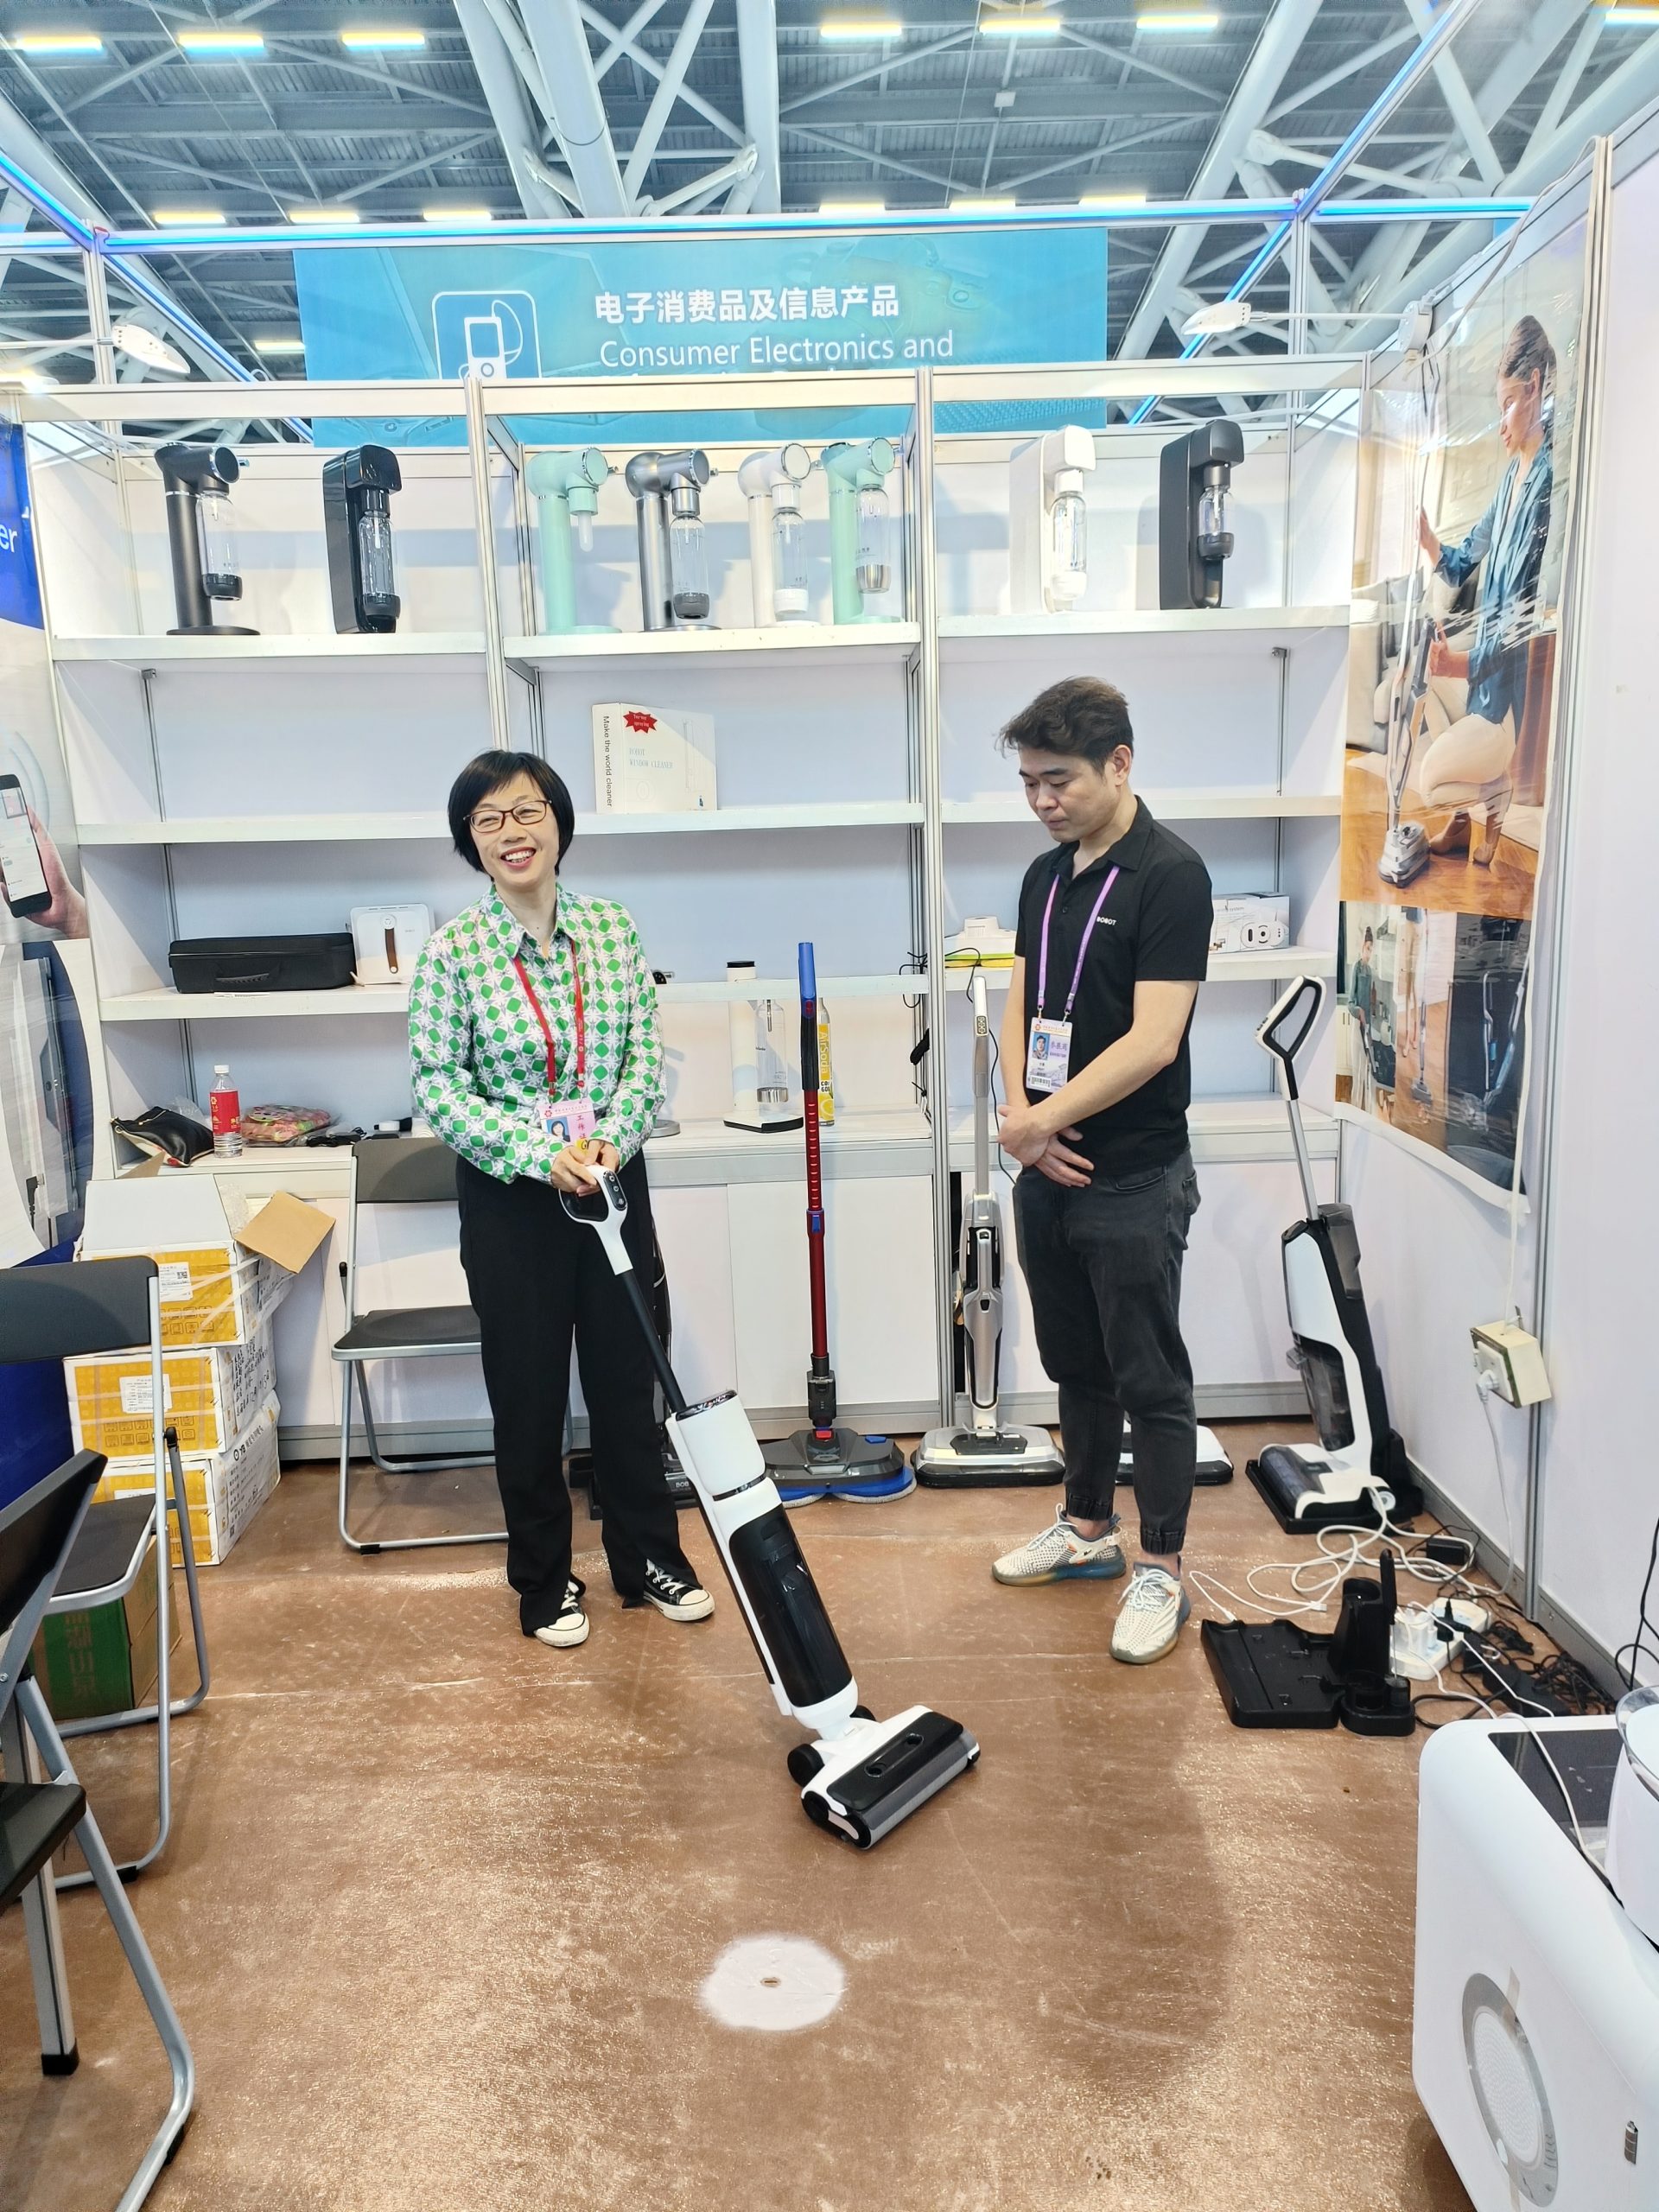 Bengbu MiFan Technology Co., Ltd to Showcase Innovative Wet-Dry Vacuum Cleaners, and Window Robot Cleaners at the 133rd Canton Fair in Guangzhou, China. - Company News - 2